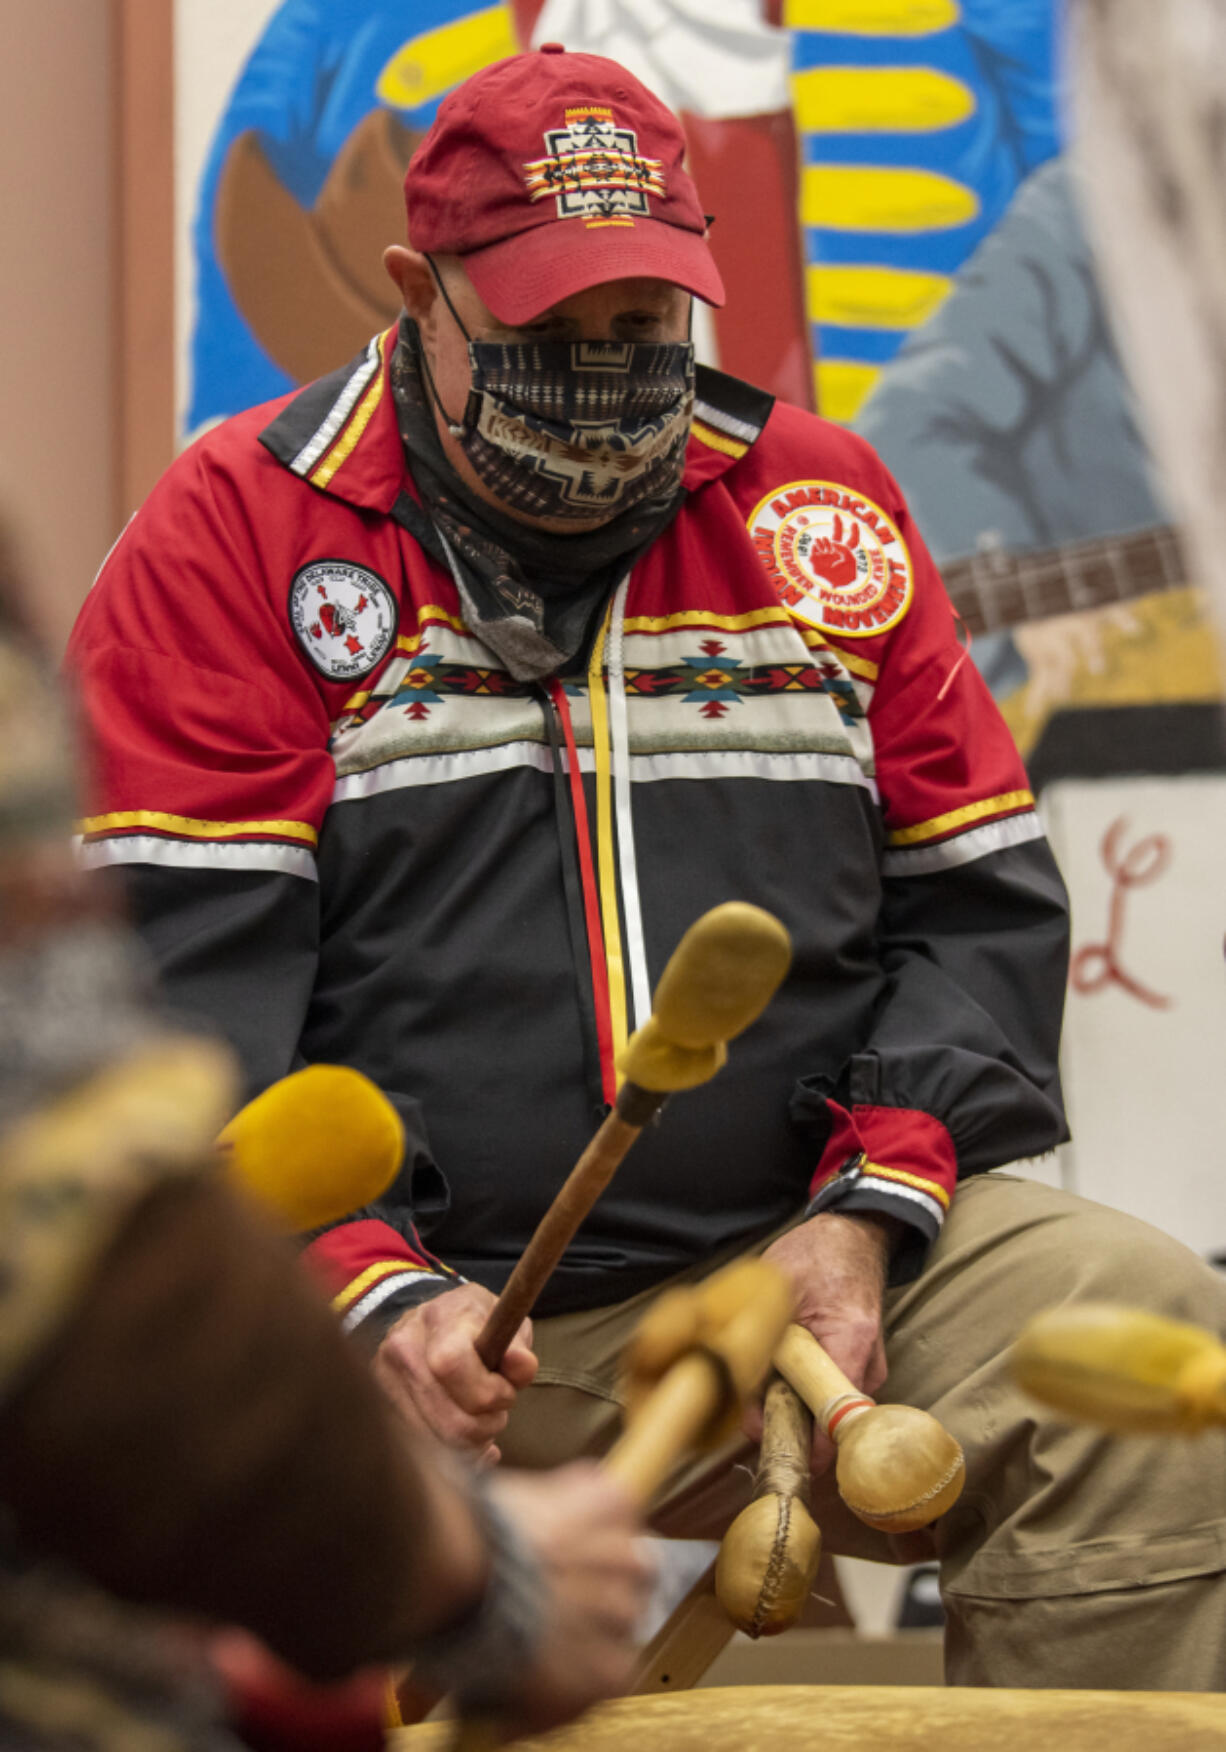 Pastor Joe Scheeler performs with Traveling Day Society on Tuesday at Lincoln Elementary School. The group played two songs to begin the event: the Eagle Spirit song and Bear Spirit song, both of which come from Anishinaabe culture.